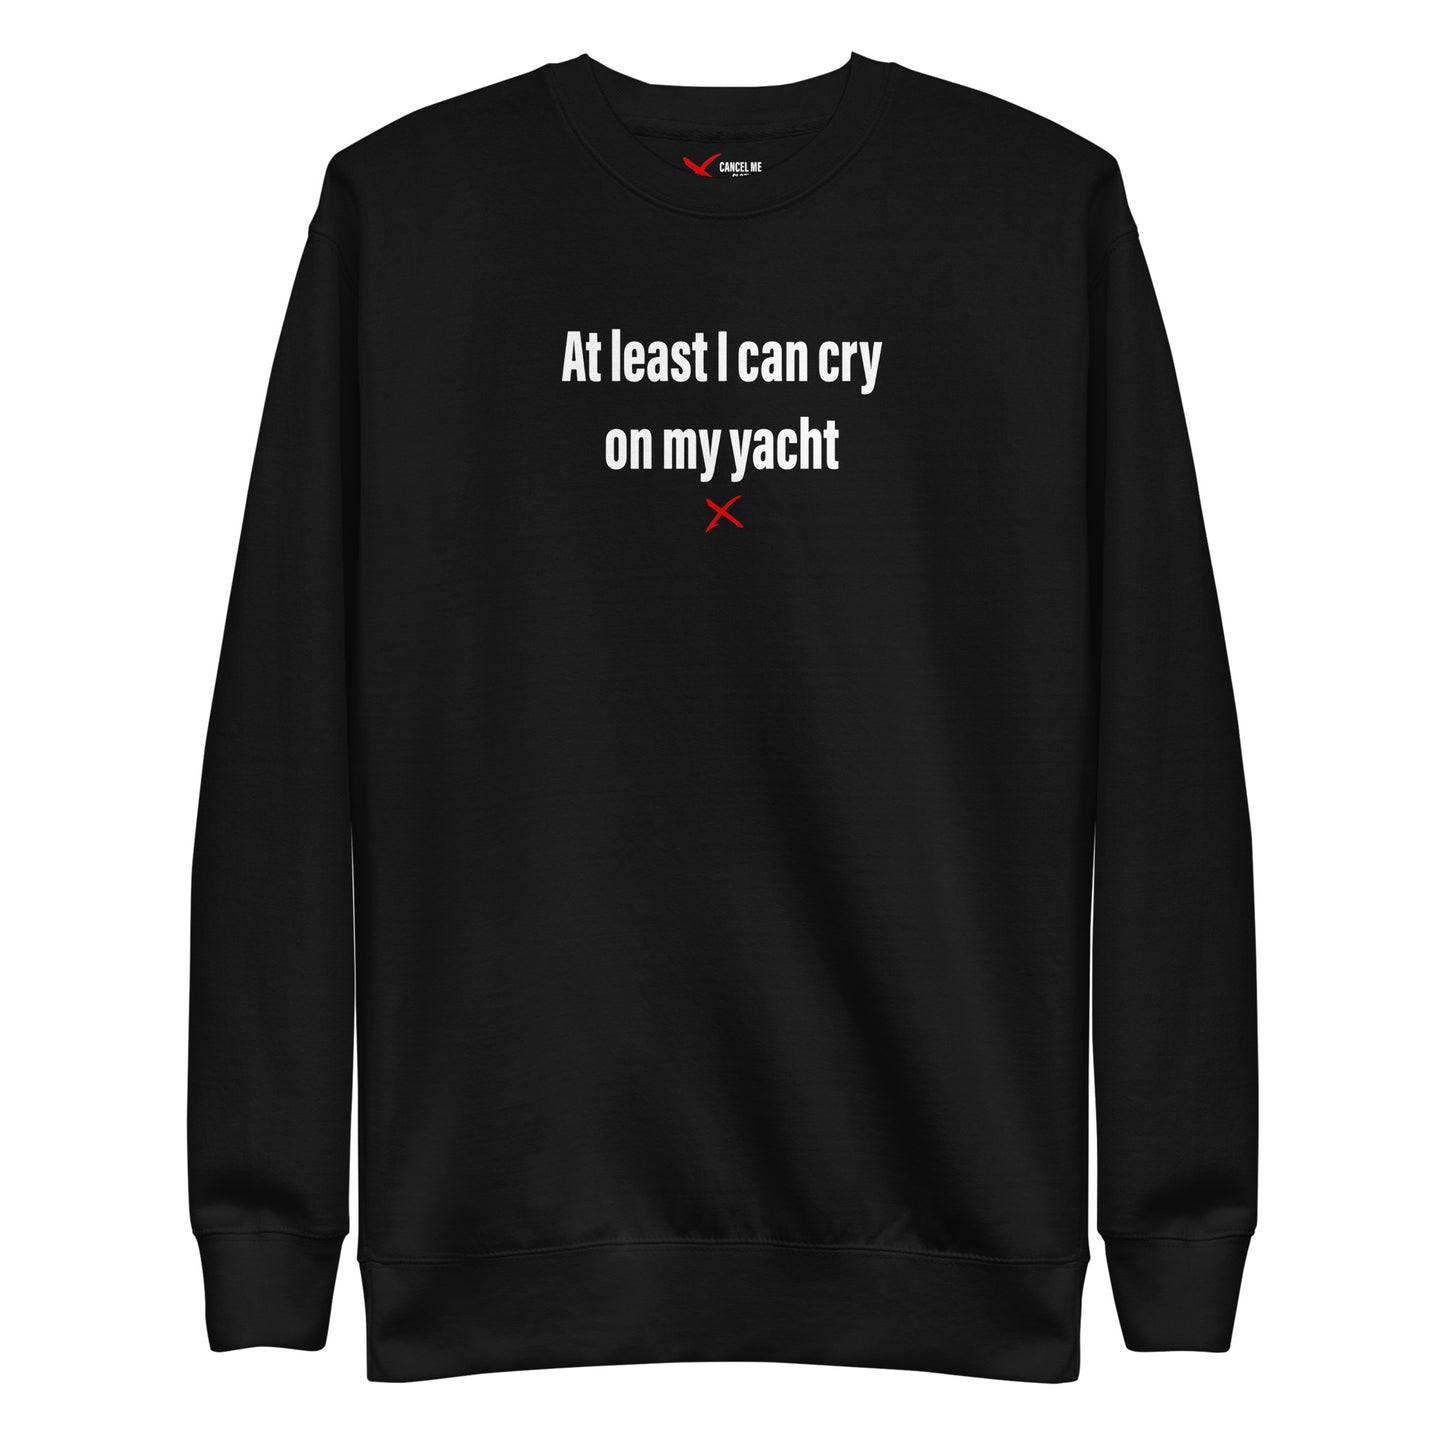 At least I can cry on my yacht - Sweatshirt